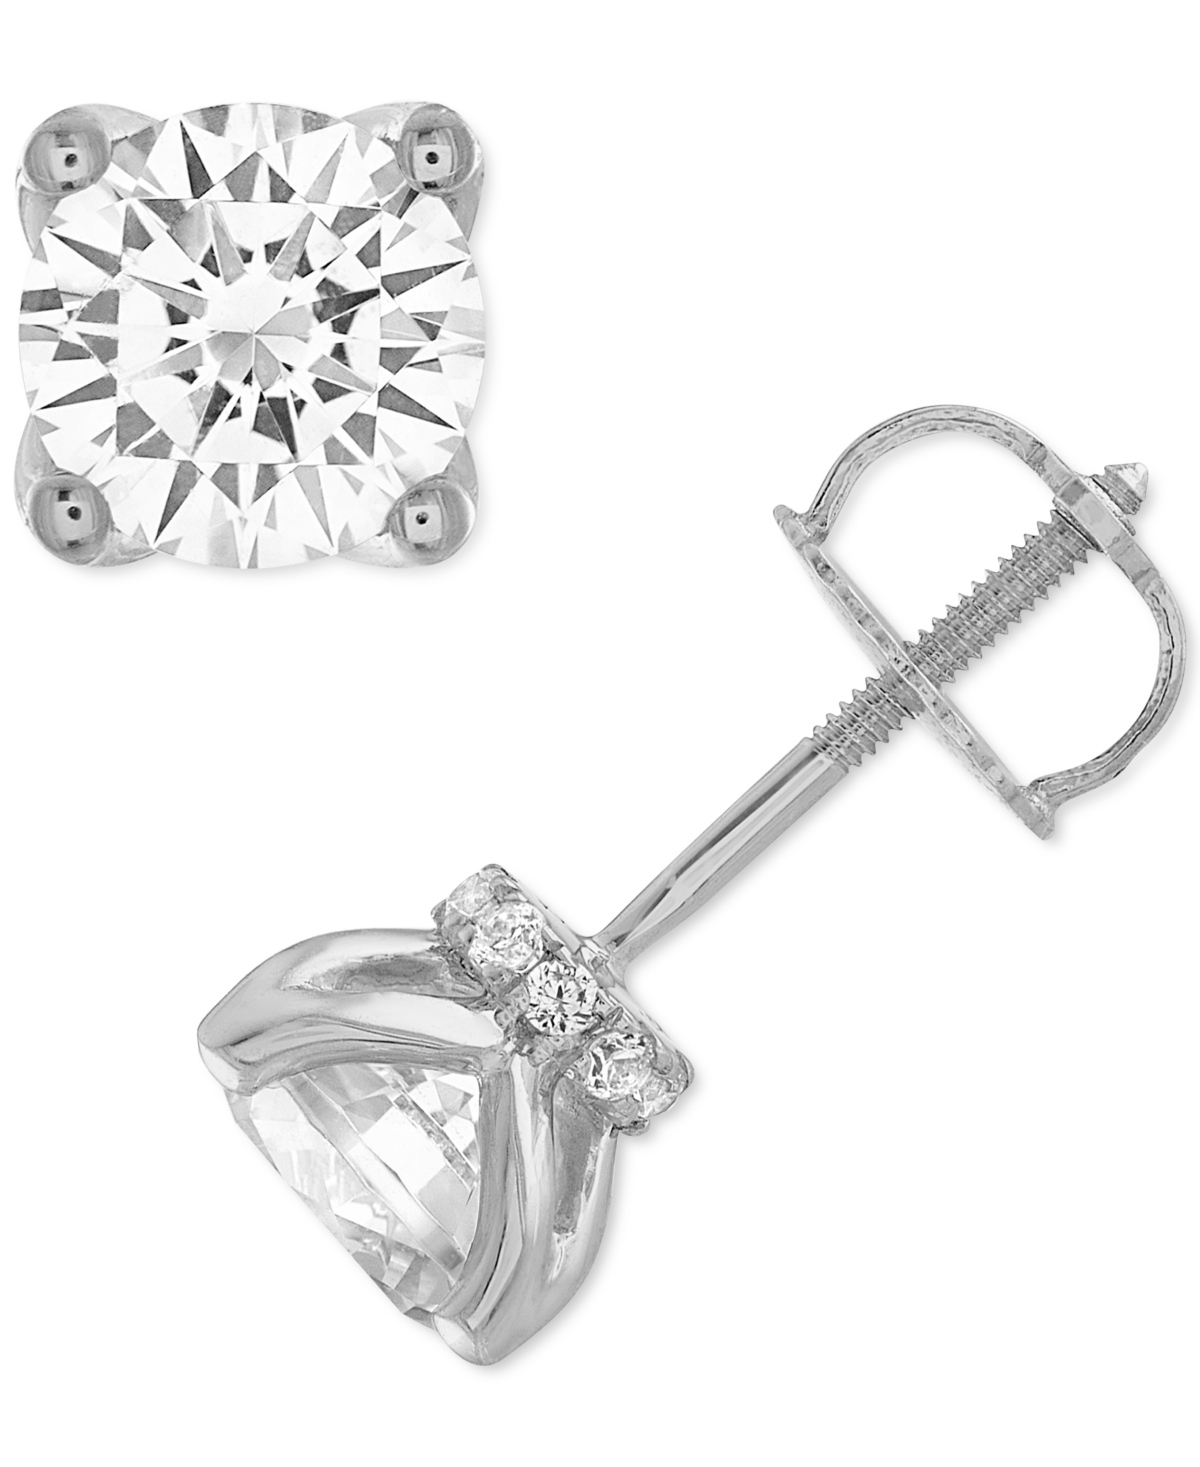 Certified Diamond Stud Earrings (1-1/2 ct. t.w.) in 14k White Gold featuring diamonds with the De Beers Code of Origin, Created for Macy's - W